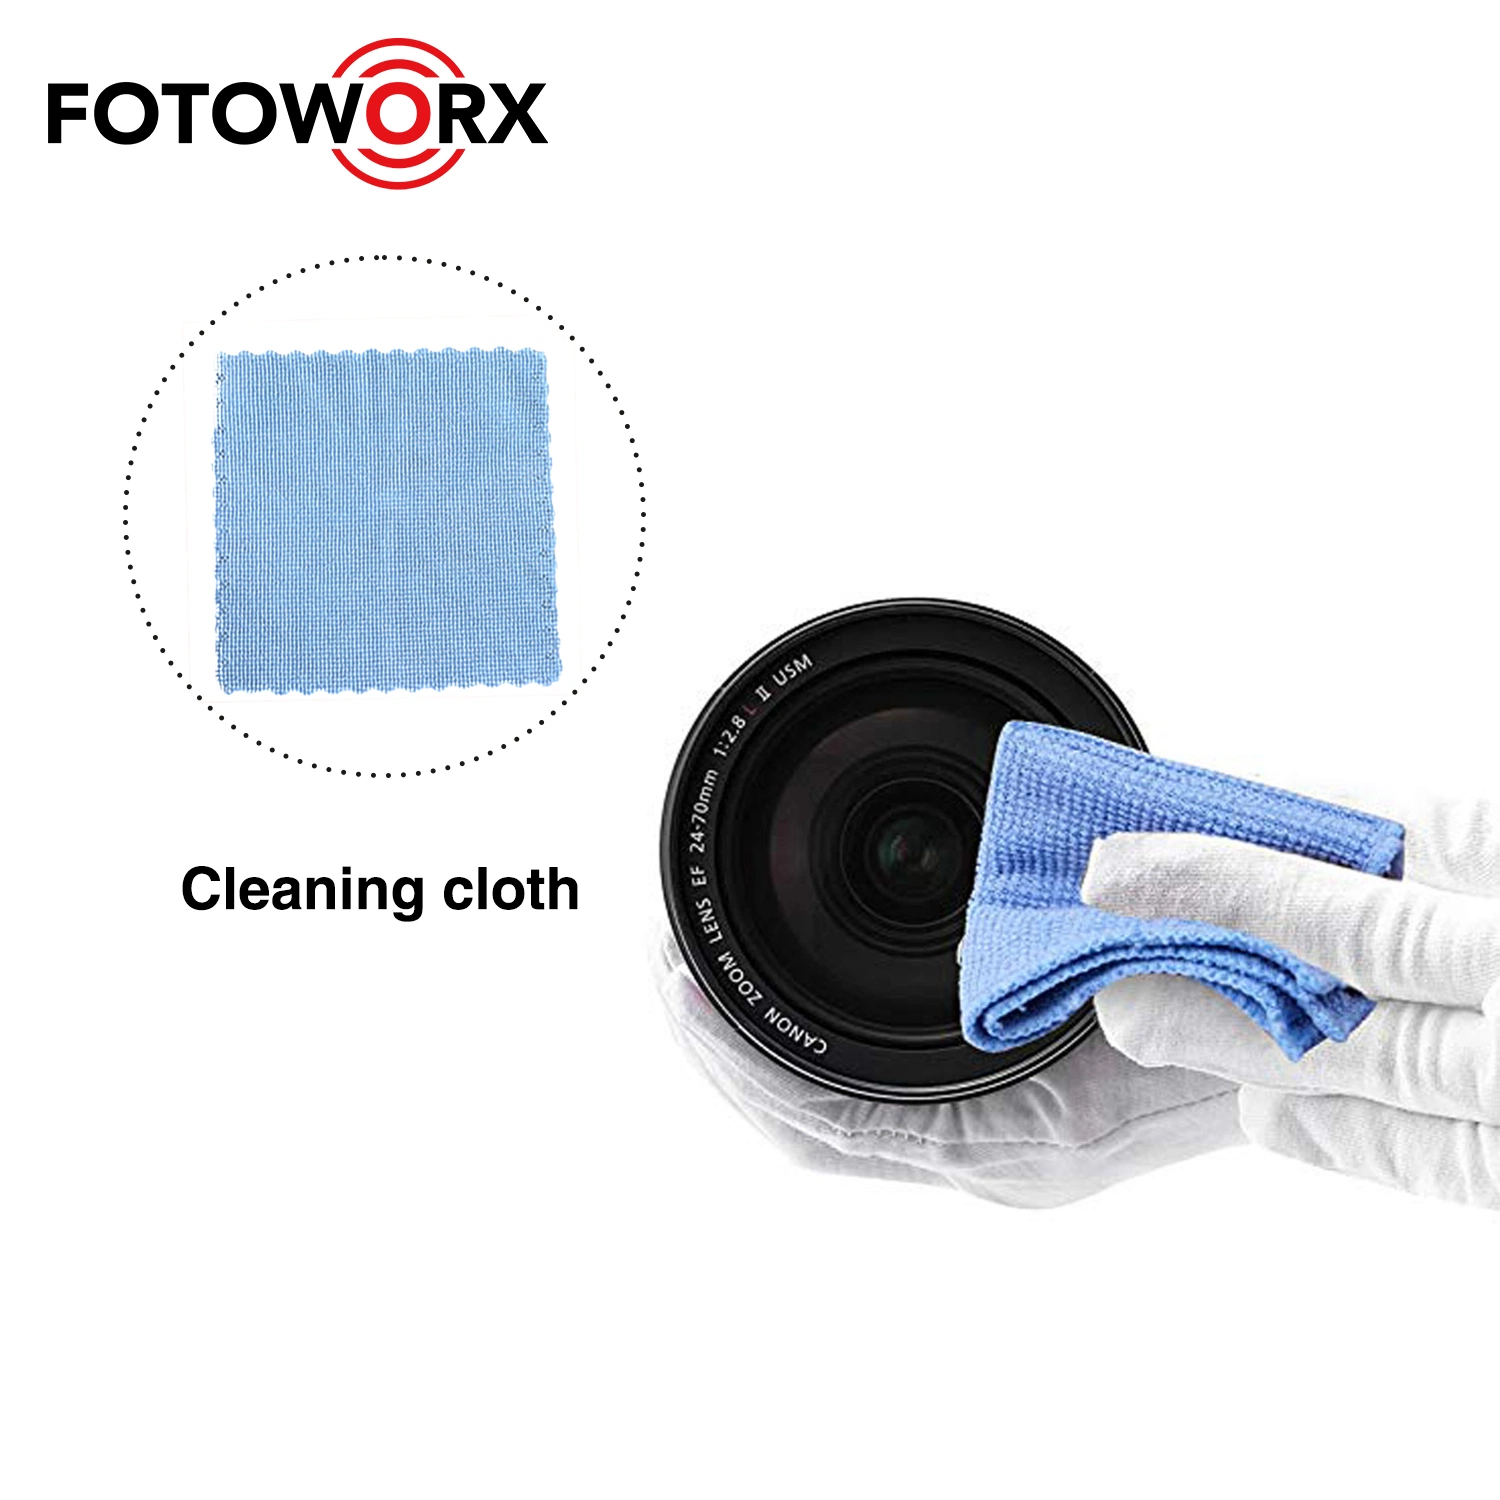 Camera Lens Cleaning Kits and Accessories Dust and Fingerprint Cleaning